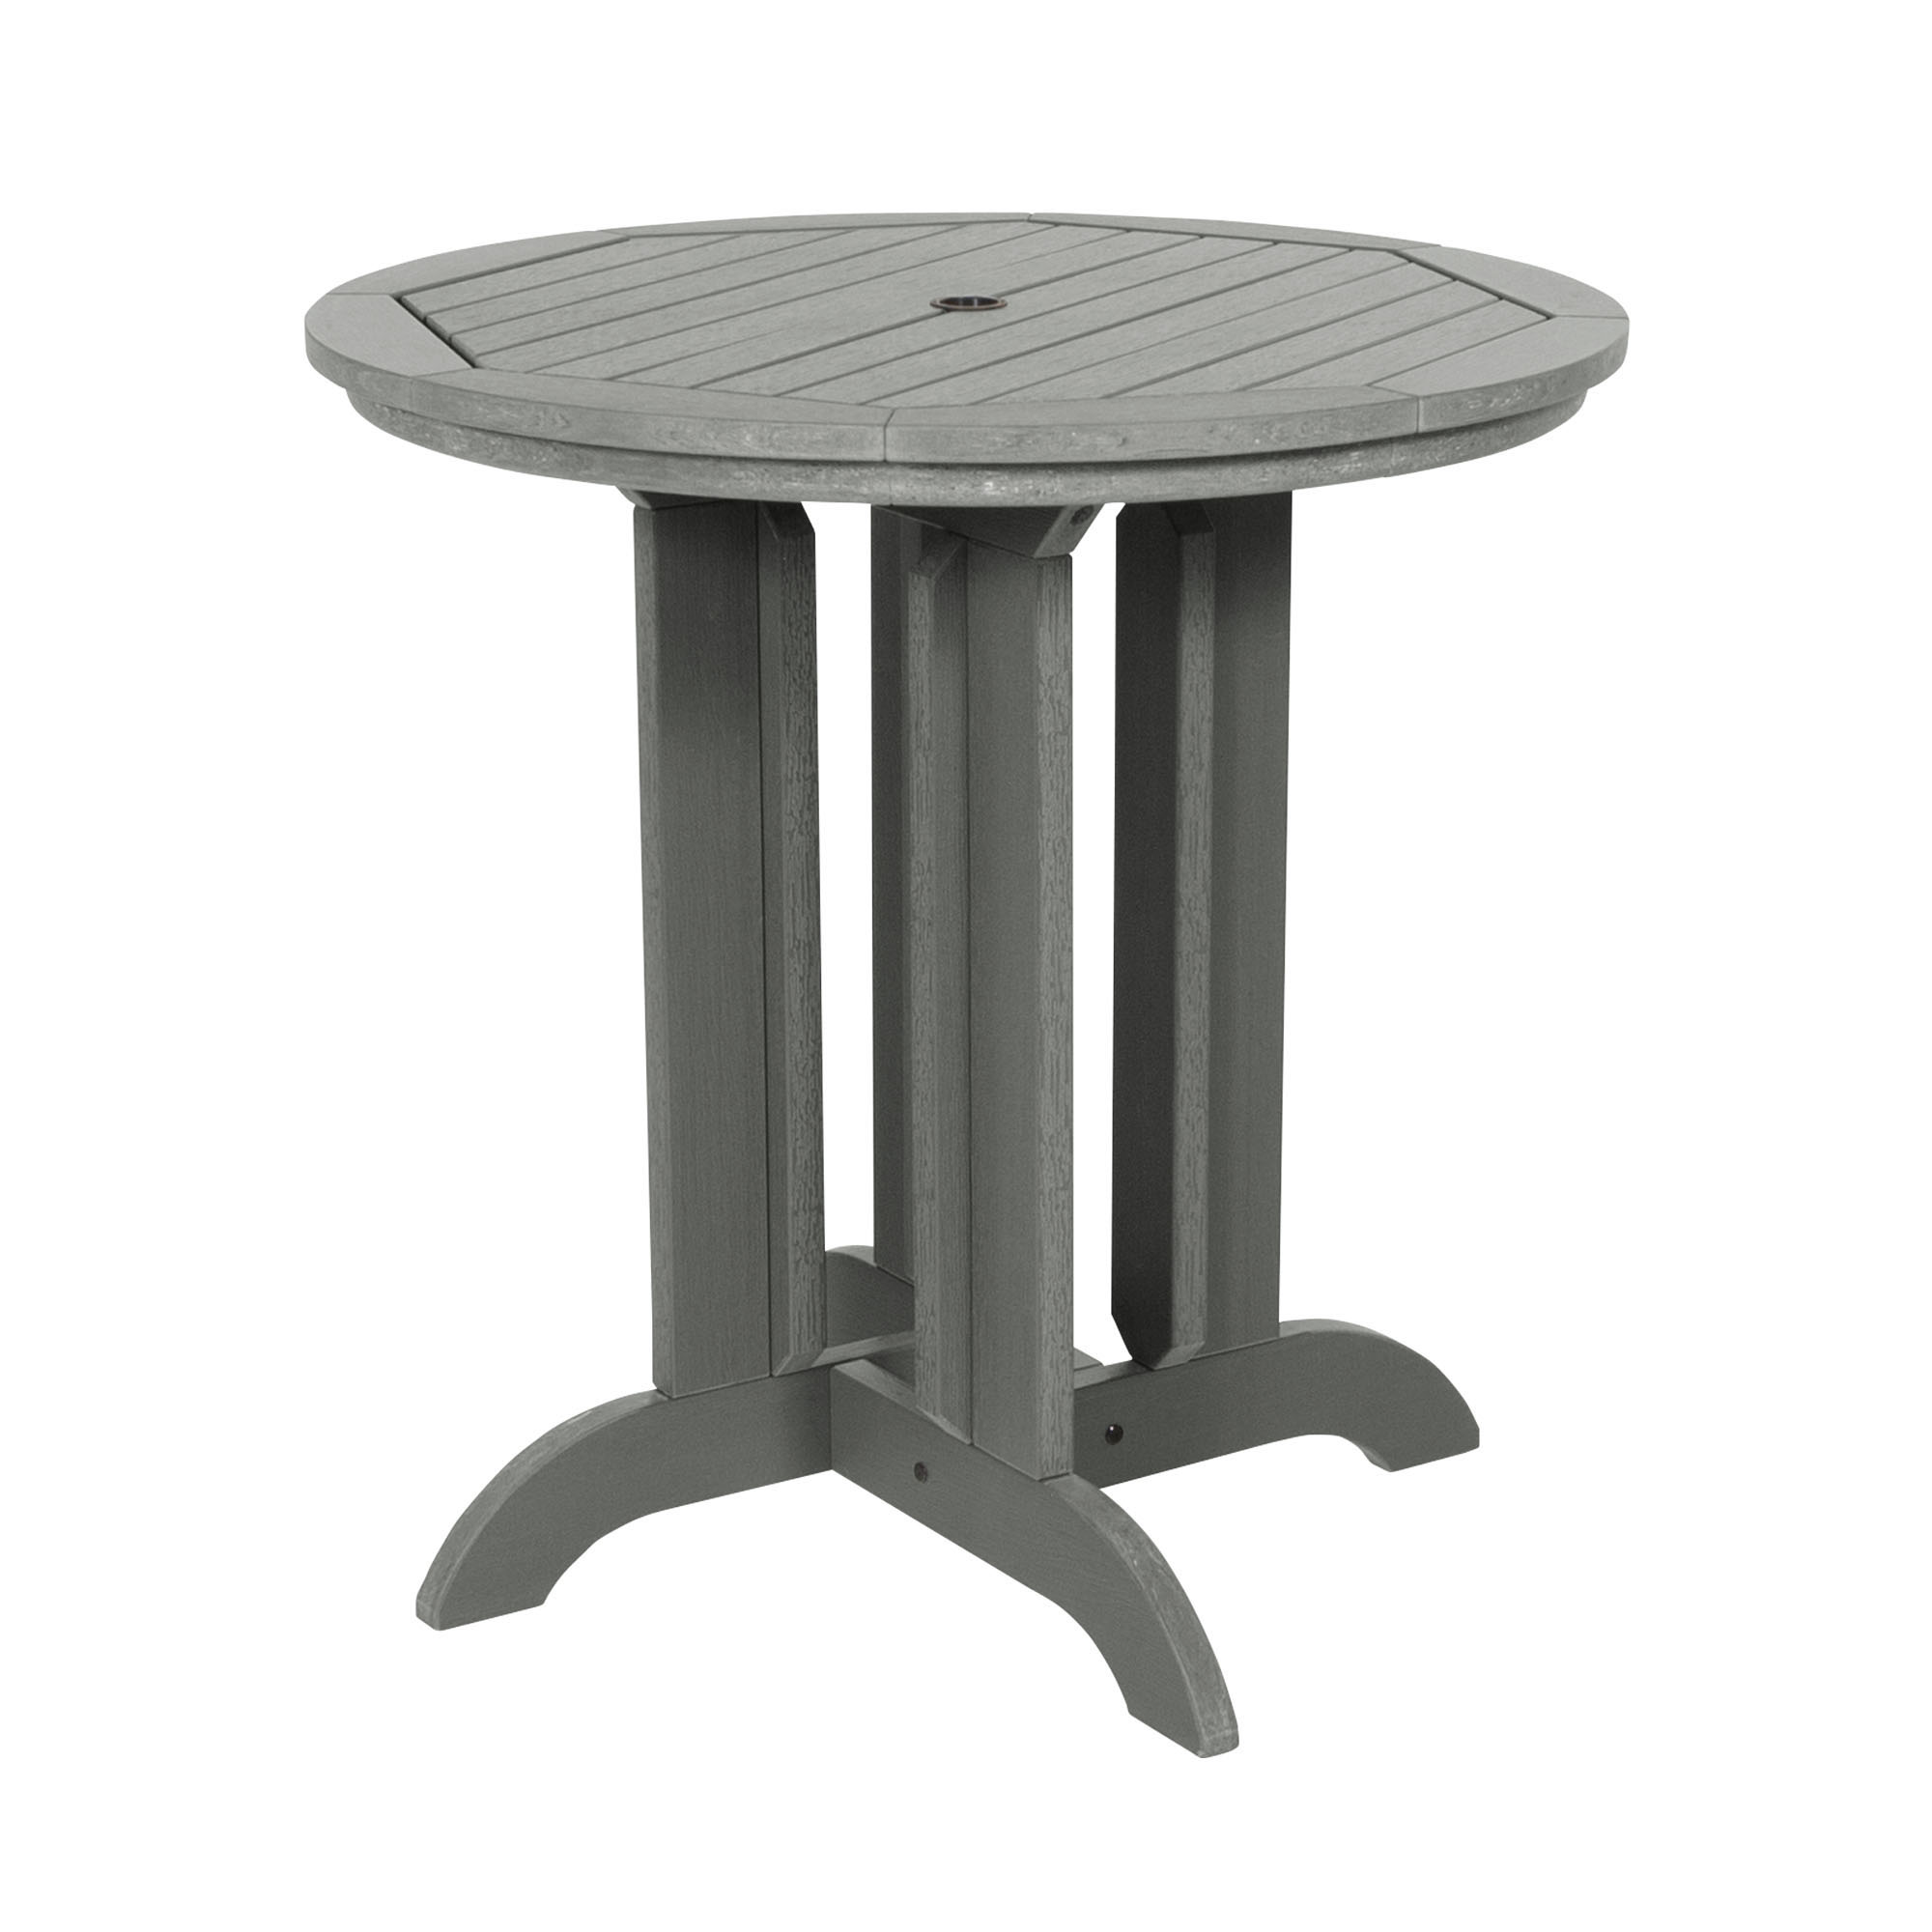 The Sequoia Professional Commercial Grade 36 inch Round Counter Height Bistro Dining Table - image 1 of 2